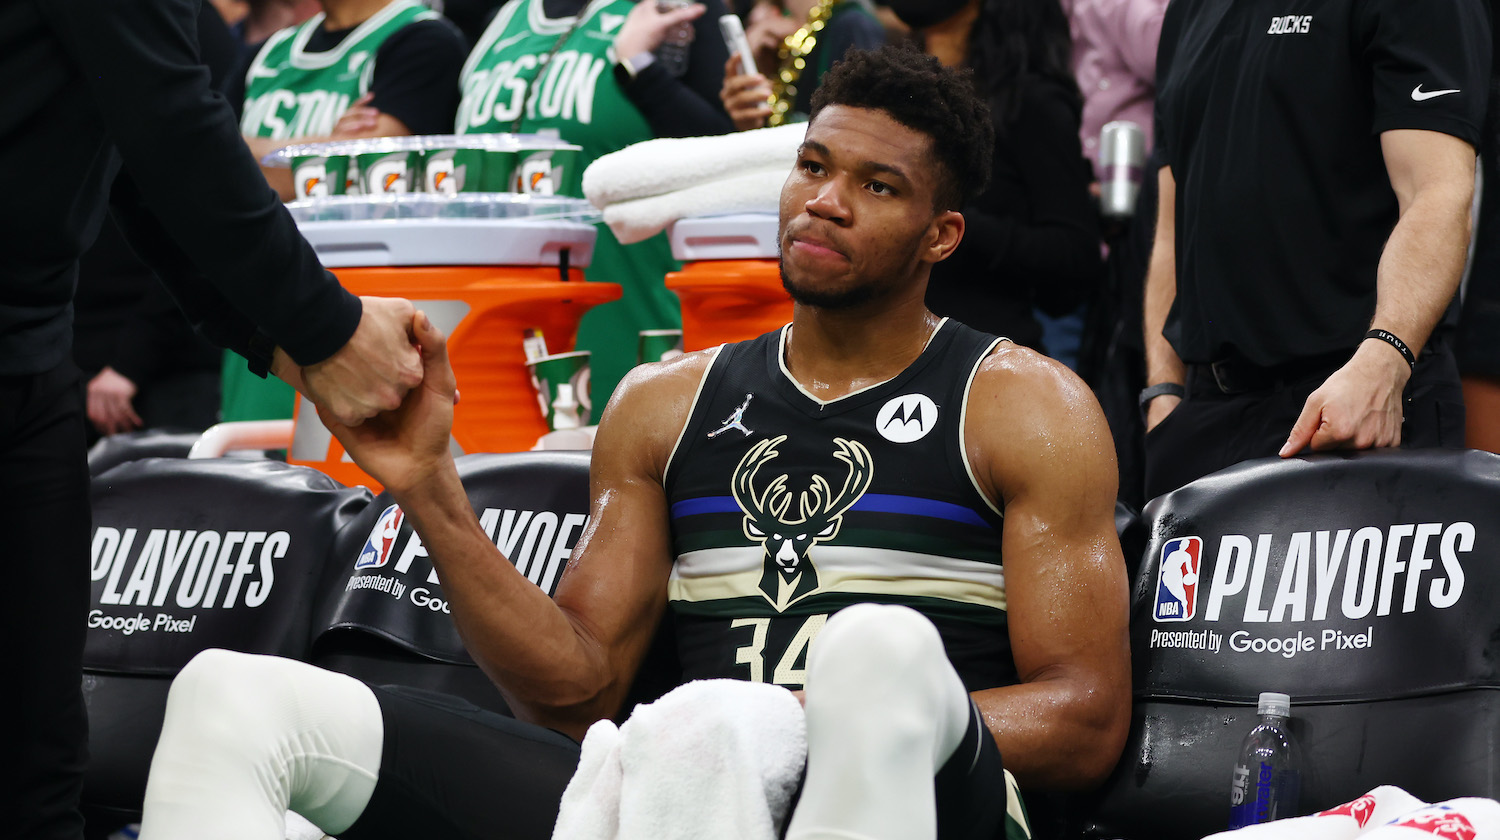 BOSTON, MASSACHUSETTS - MAY 15: Giannis Antetokounmpo #34 of the Milwaukee Bucks reacts on the bench during the fourth quarter in Game Seven of the 2022 NBA Playoffs Eastern Conference Semifinals against the Boston Celtics at TD Garden on May 15, 2022 in Boston, Massachusetts. NOTE TO USER: User expressly acknowledges and agrees that, by downloading and/or using this photograph, User is consenting to the terms and conditions of the Getty Images License Agreement. (Photo by Adam Glanzman/Getty Images)